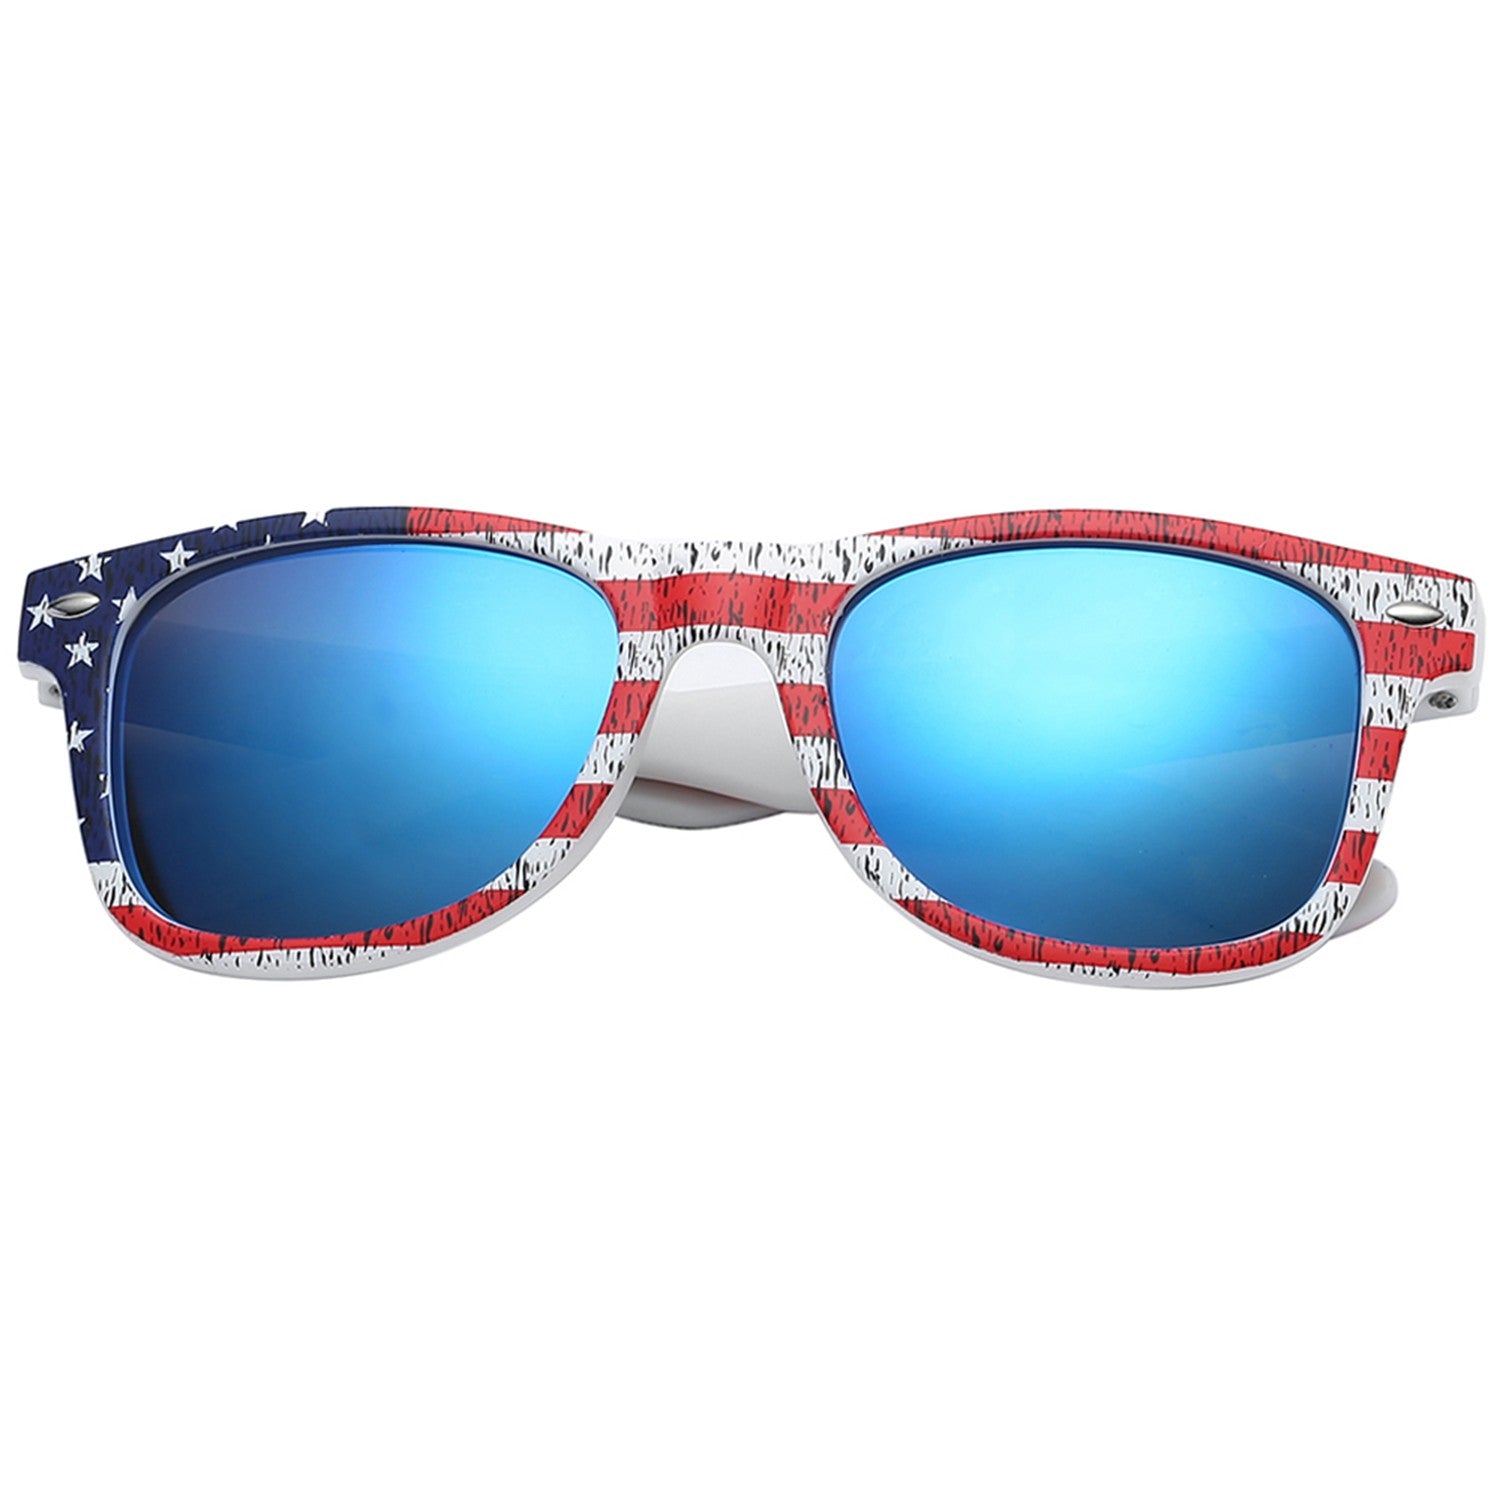 Polarspex Polarized 80's Retro Style Kids Sunglasses with American Flag Frames and Polarized Ice Blue Lenses for Boys and Girls